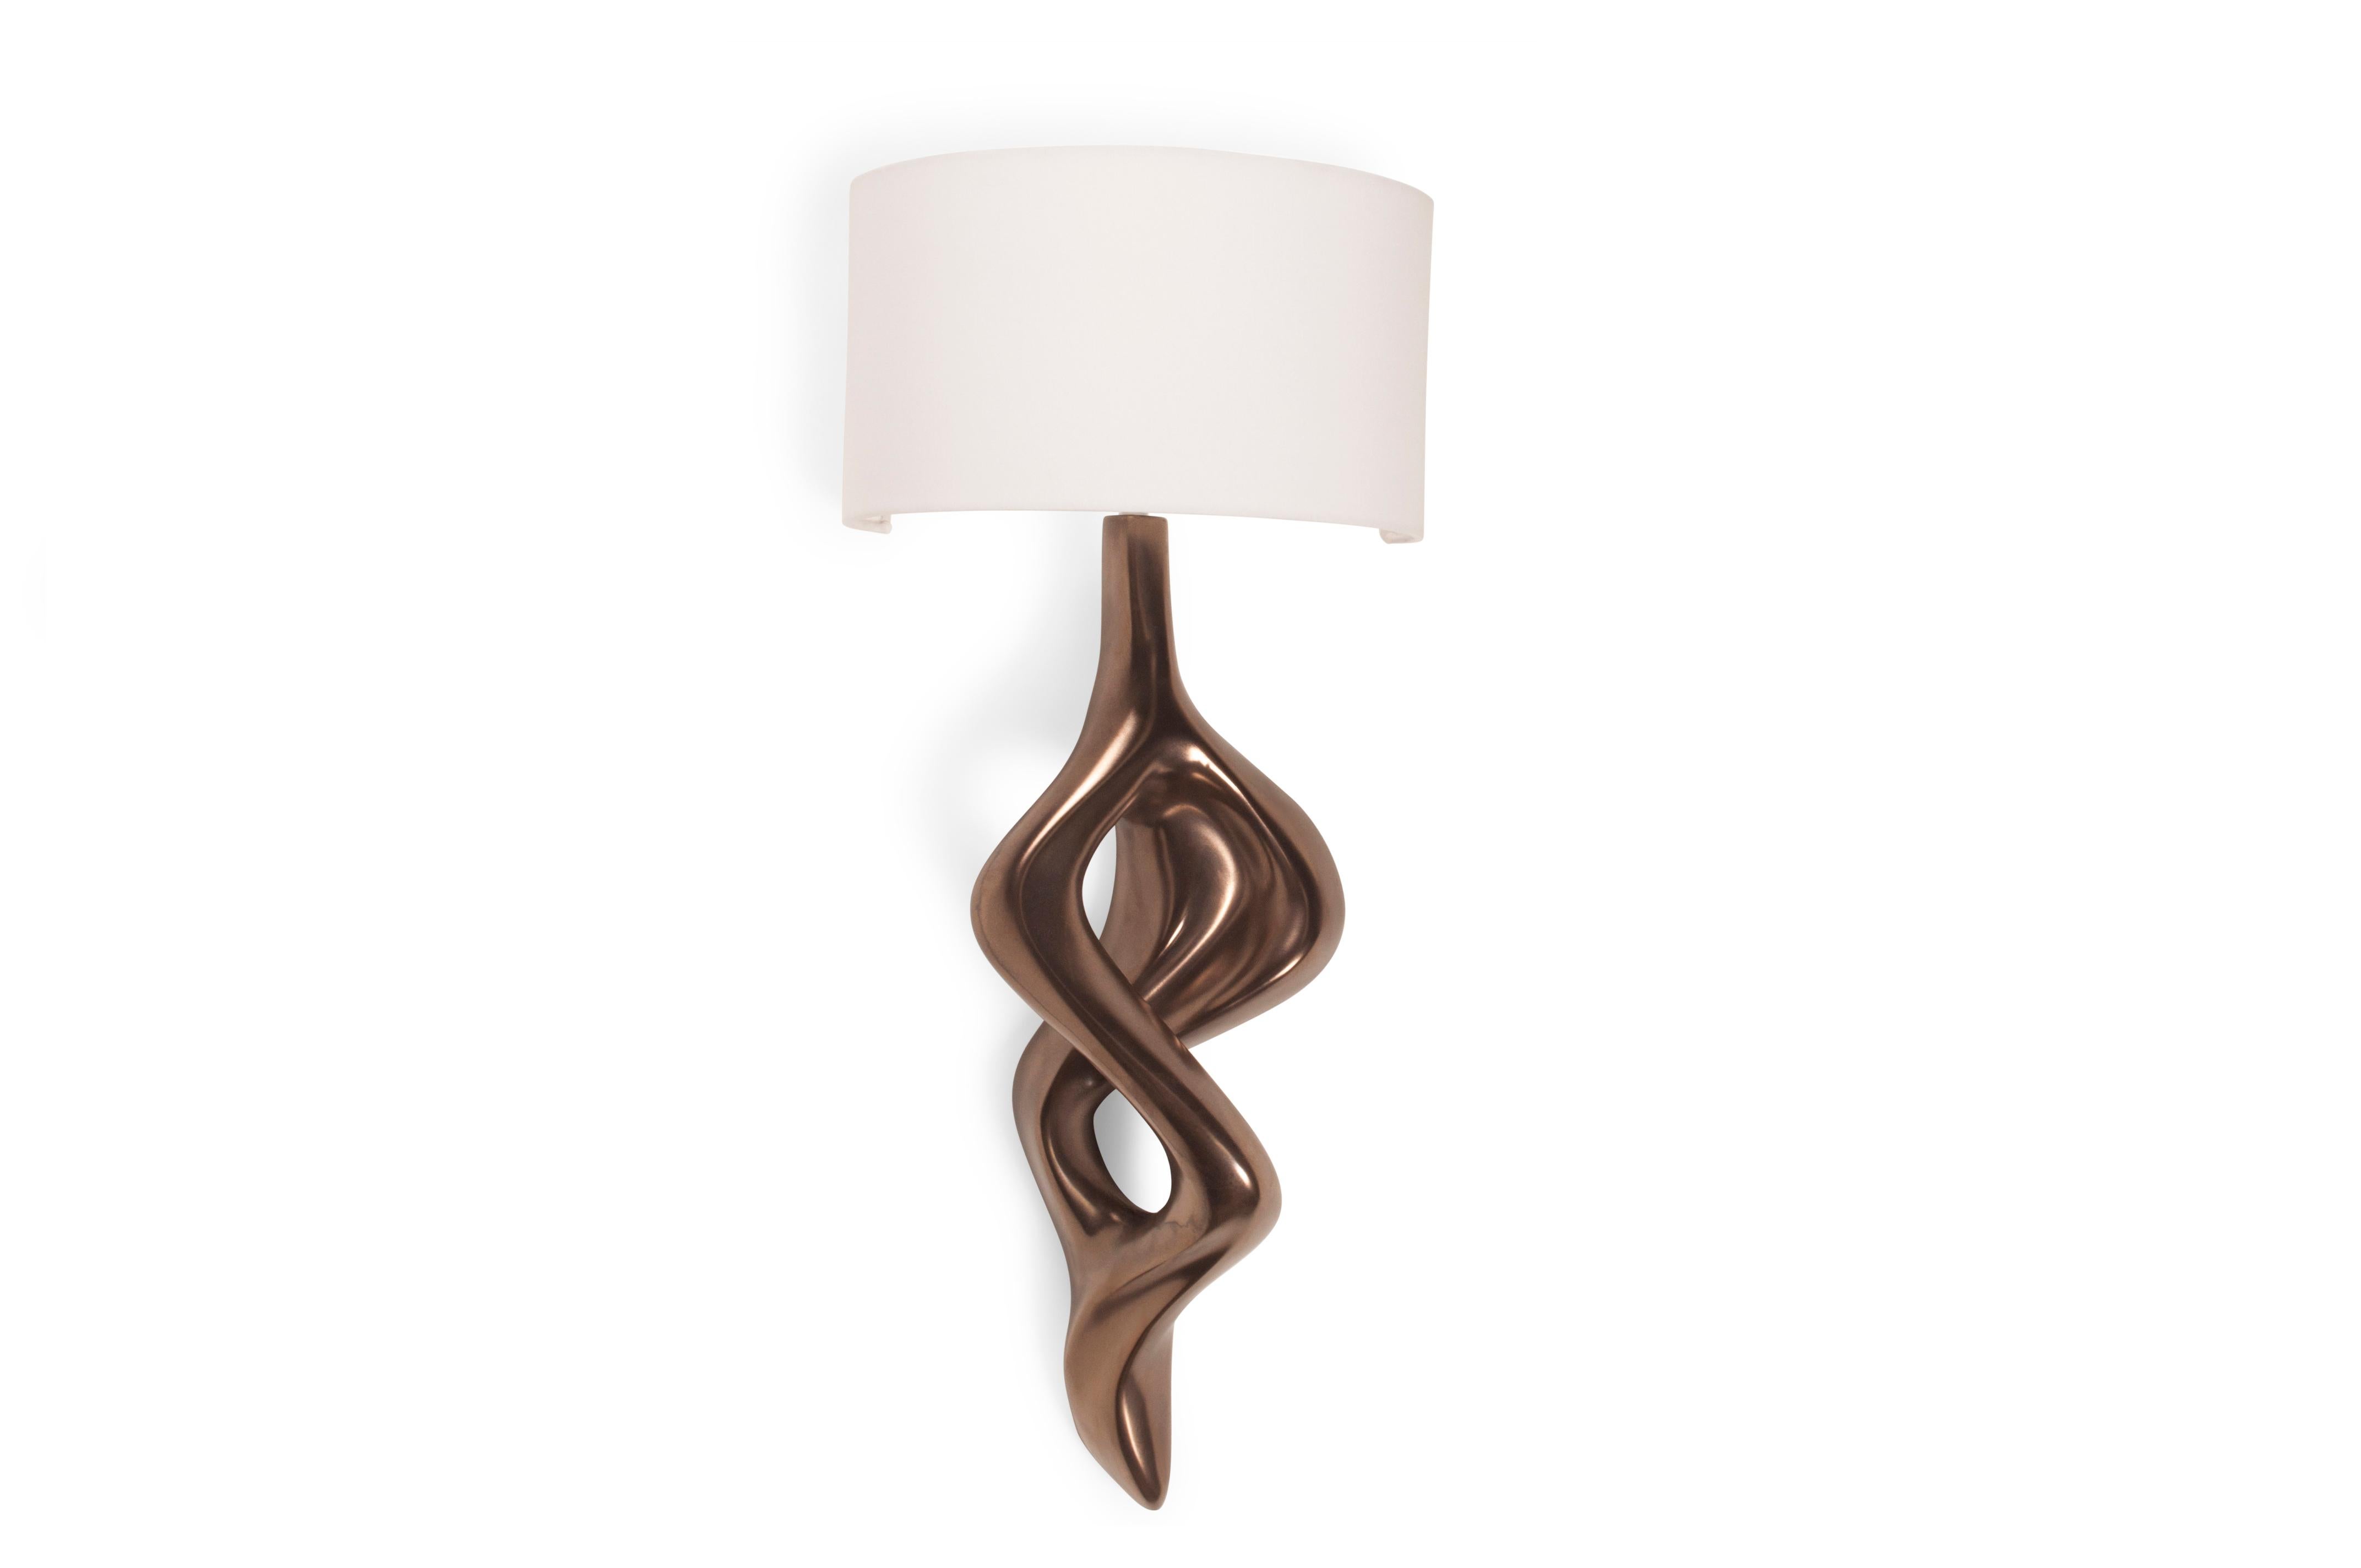 Nomi sconce is carved from solid wood walnut with half a drum shape shade. Shade dimensions: 12